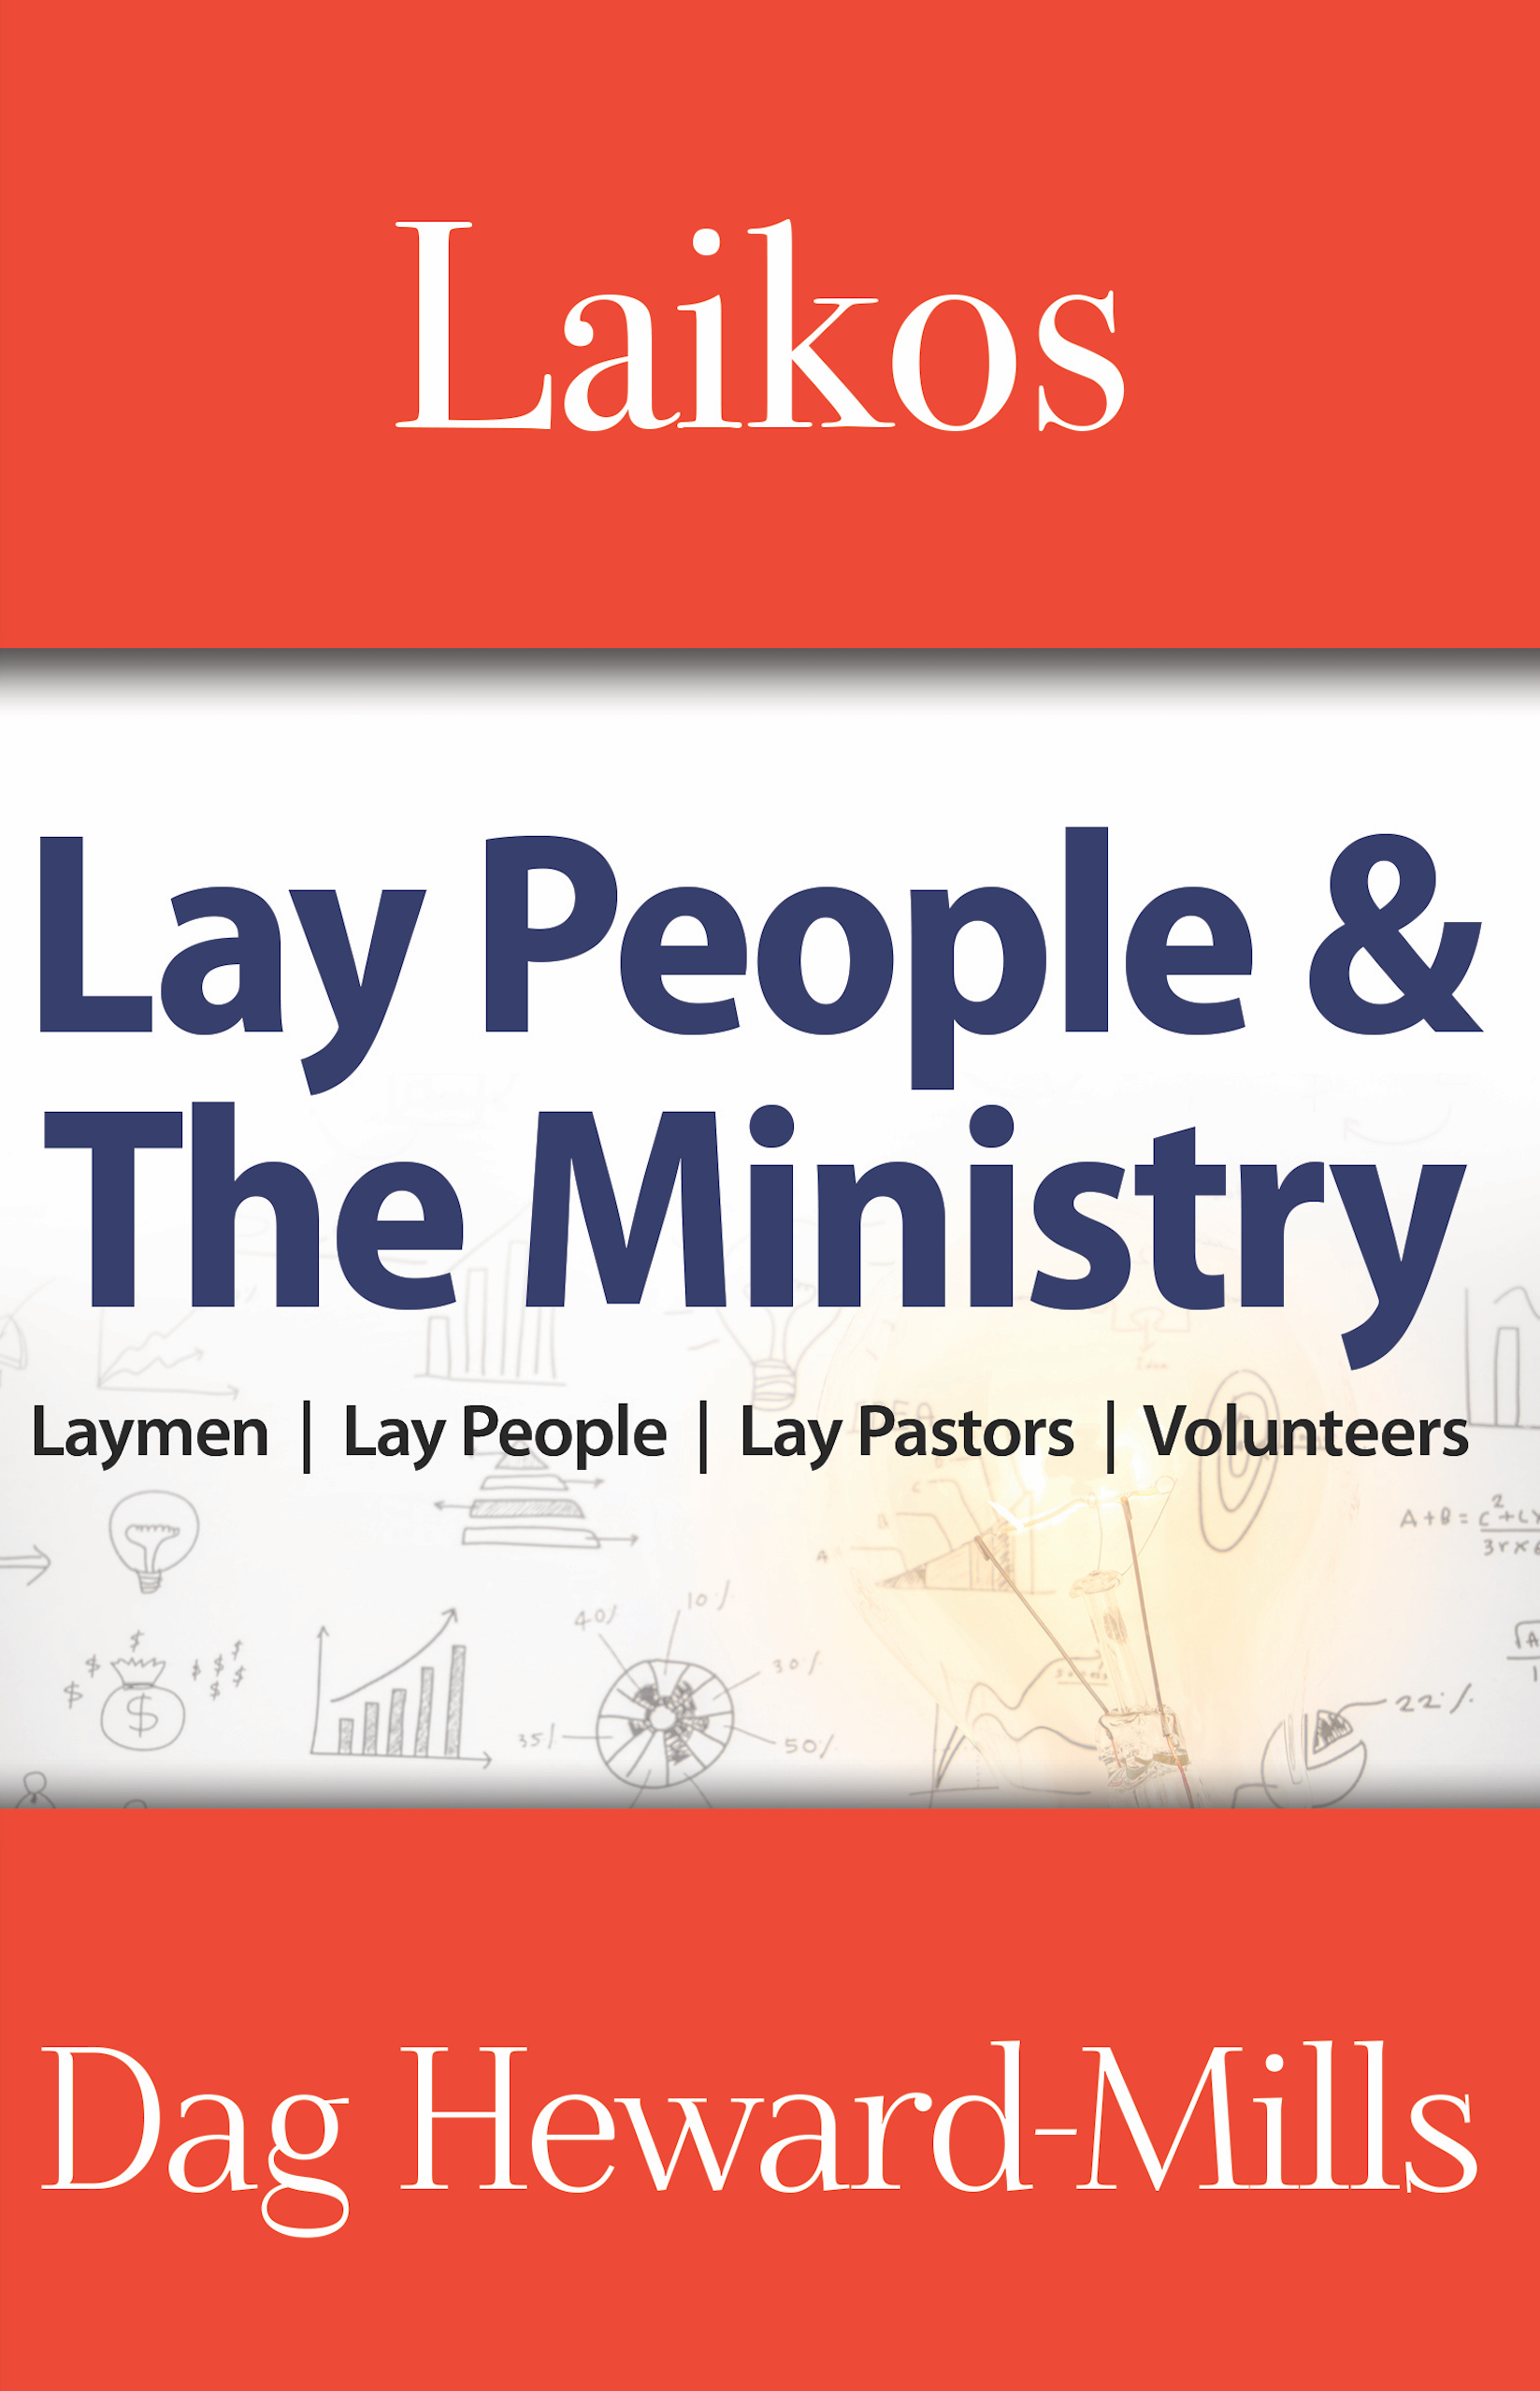 Laikos: Laikos: Lay People and the Ministry by Dag Heward-Mills